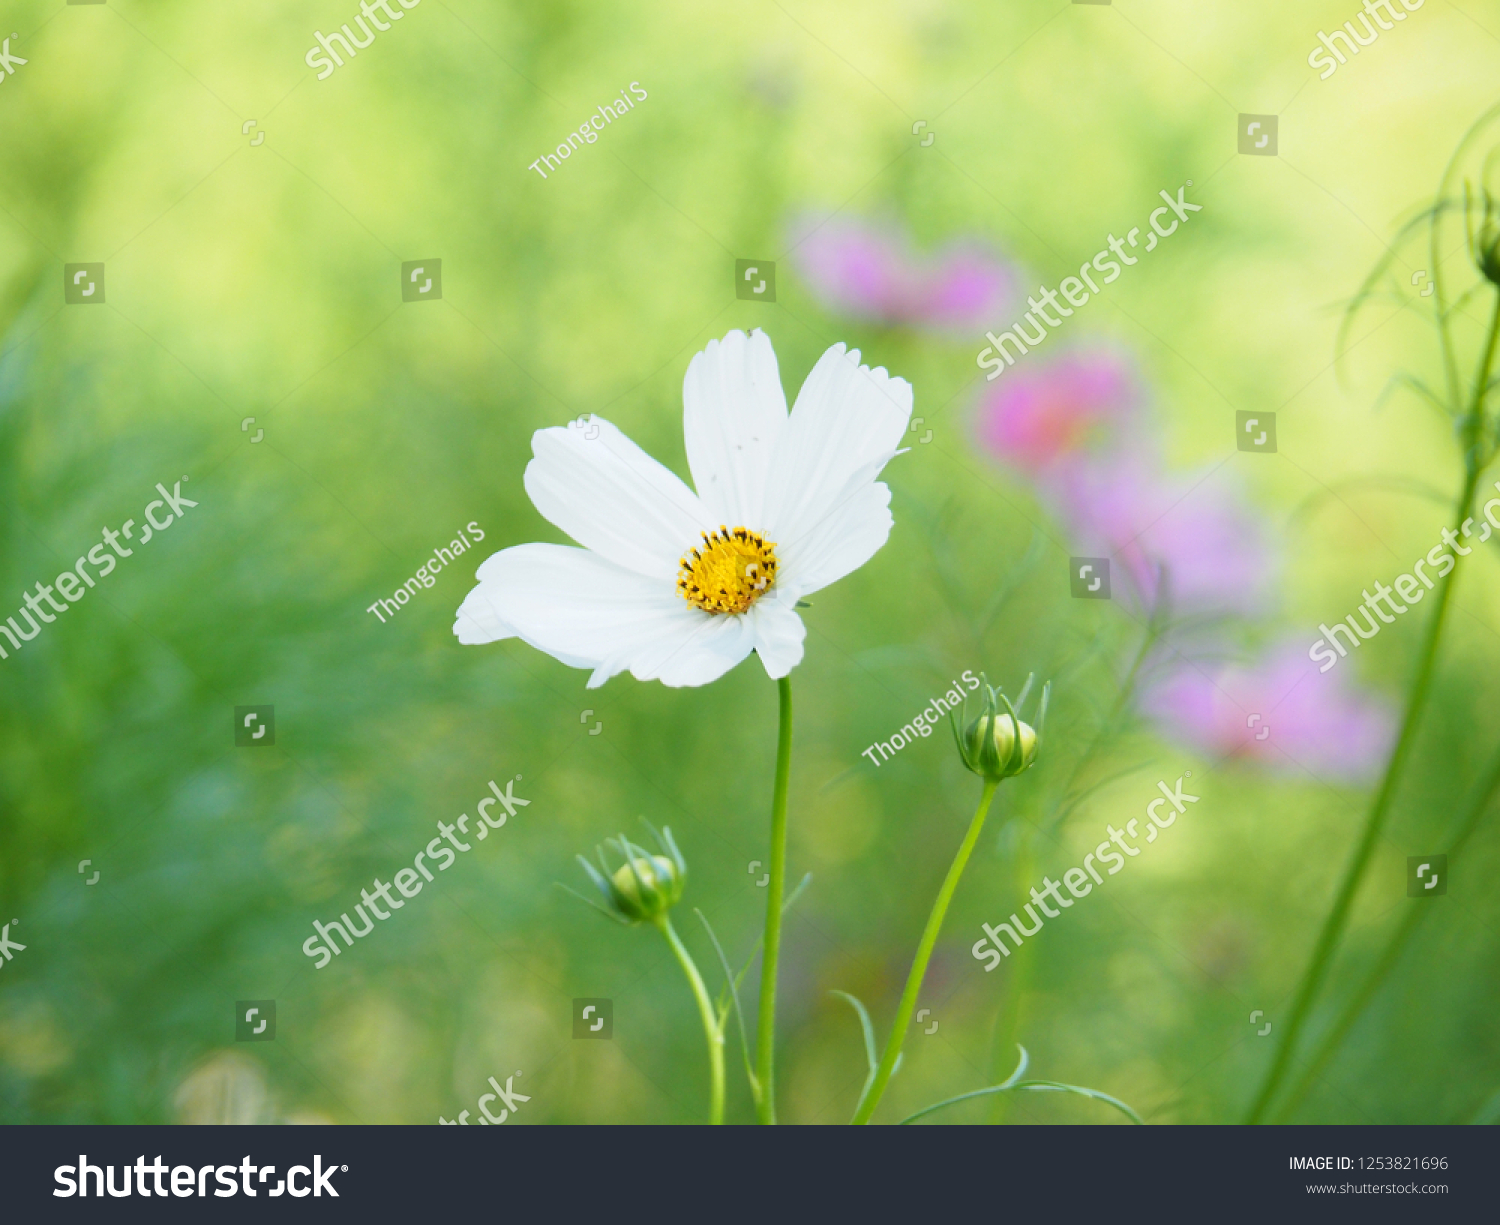 white mexican aster cosmos flower scientific stock photo (edit now